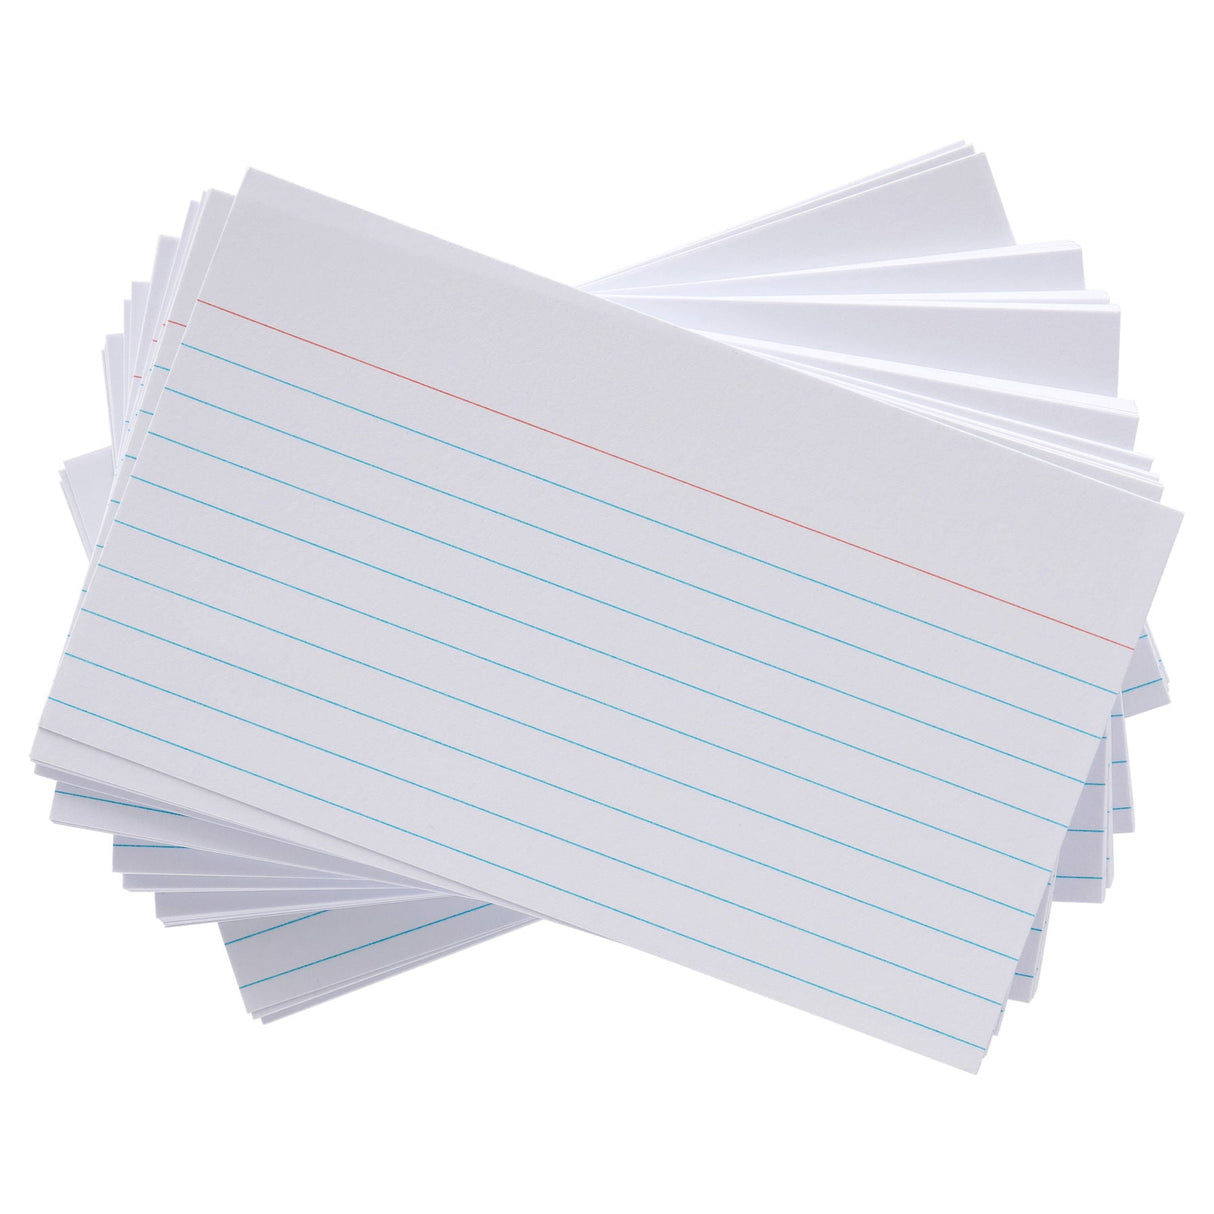 Premier Office 5 x 3 Ruled Record Cards - White - Pack of 100-Index Cards & Boxes-Premier Office|StationeryShop.co.uk